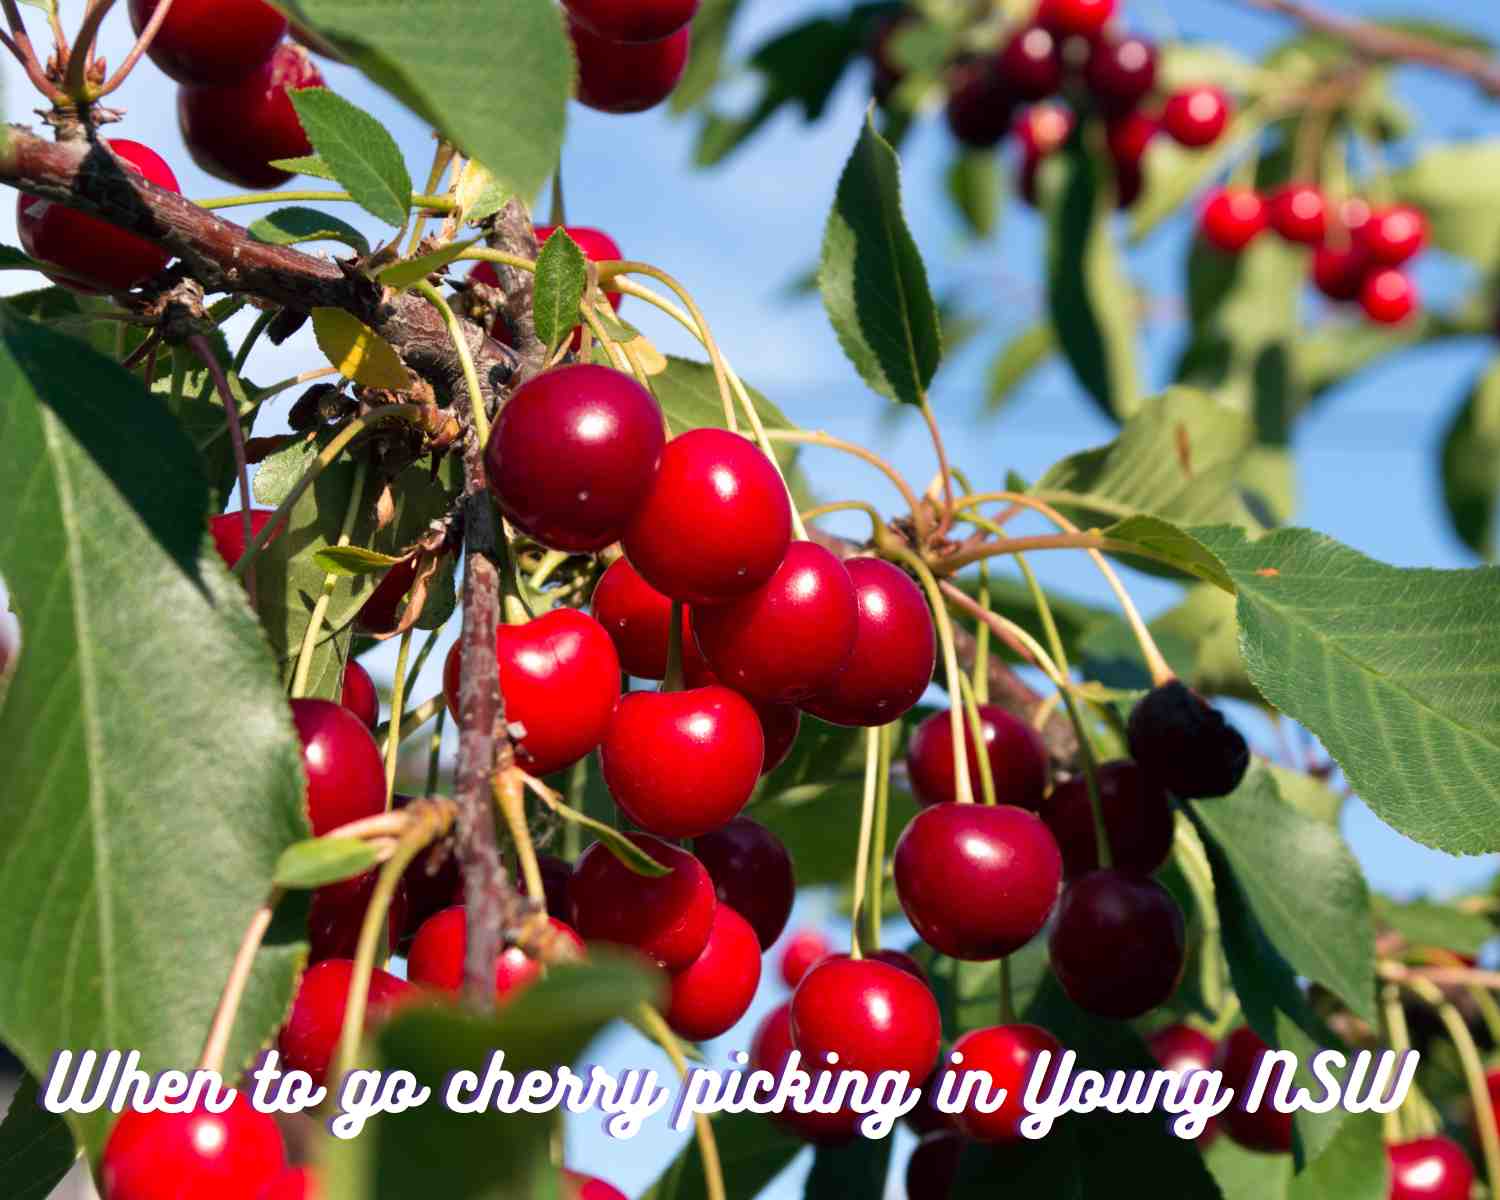 Cherry Picking in Young NSW with Kids